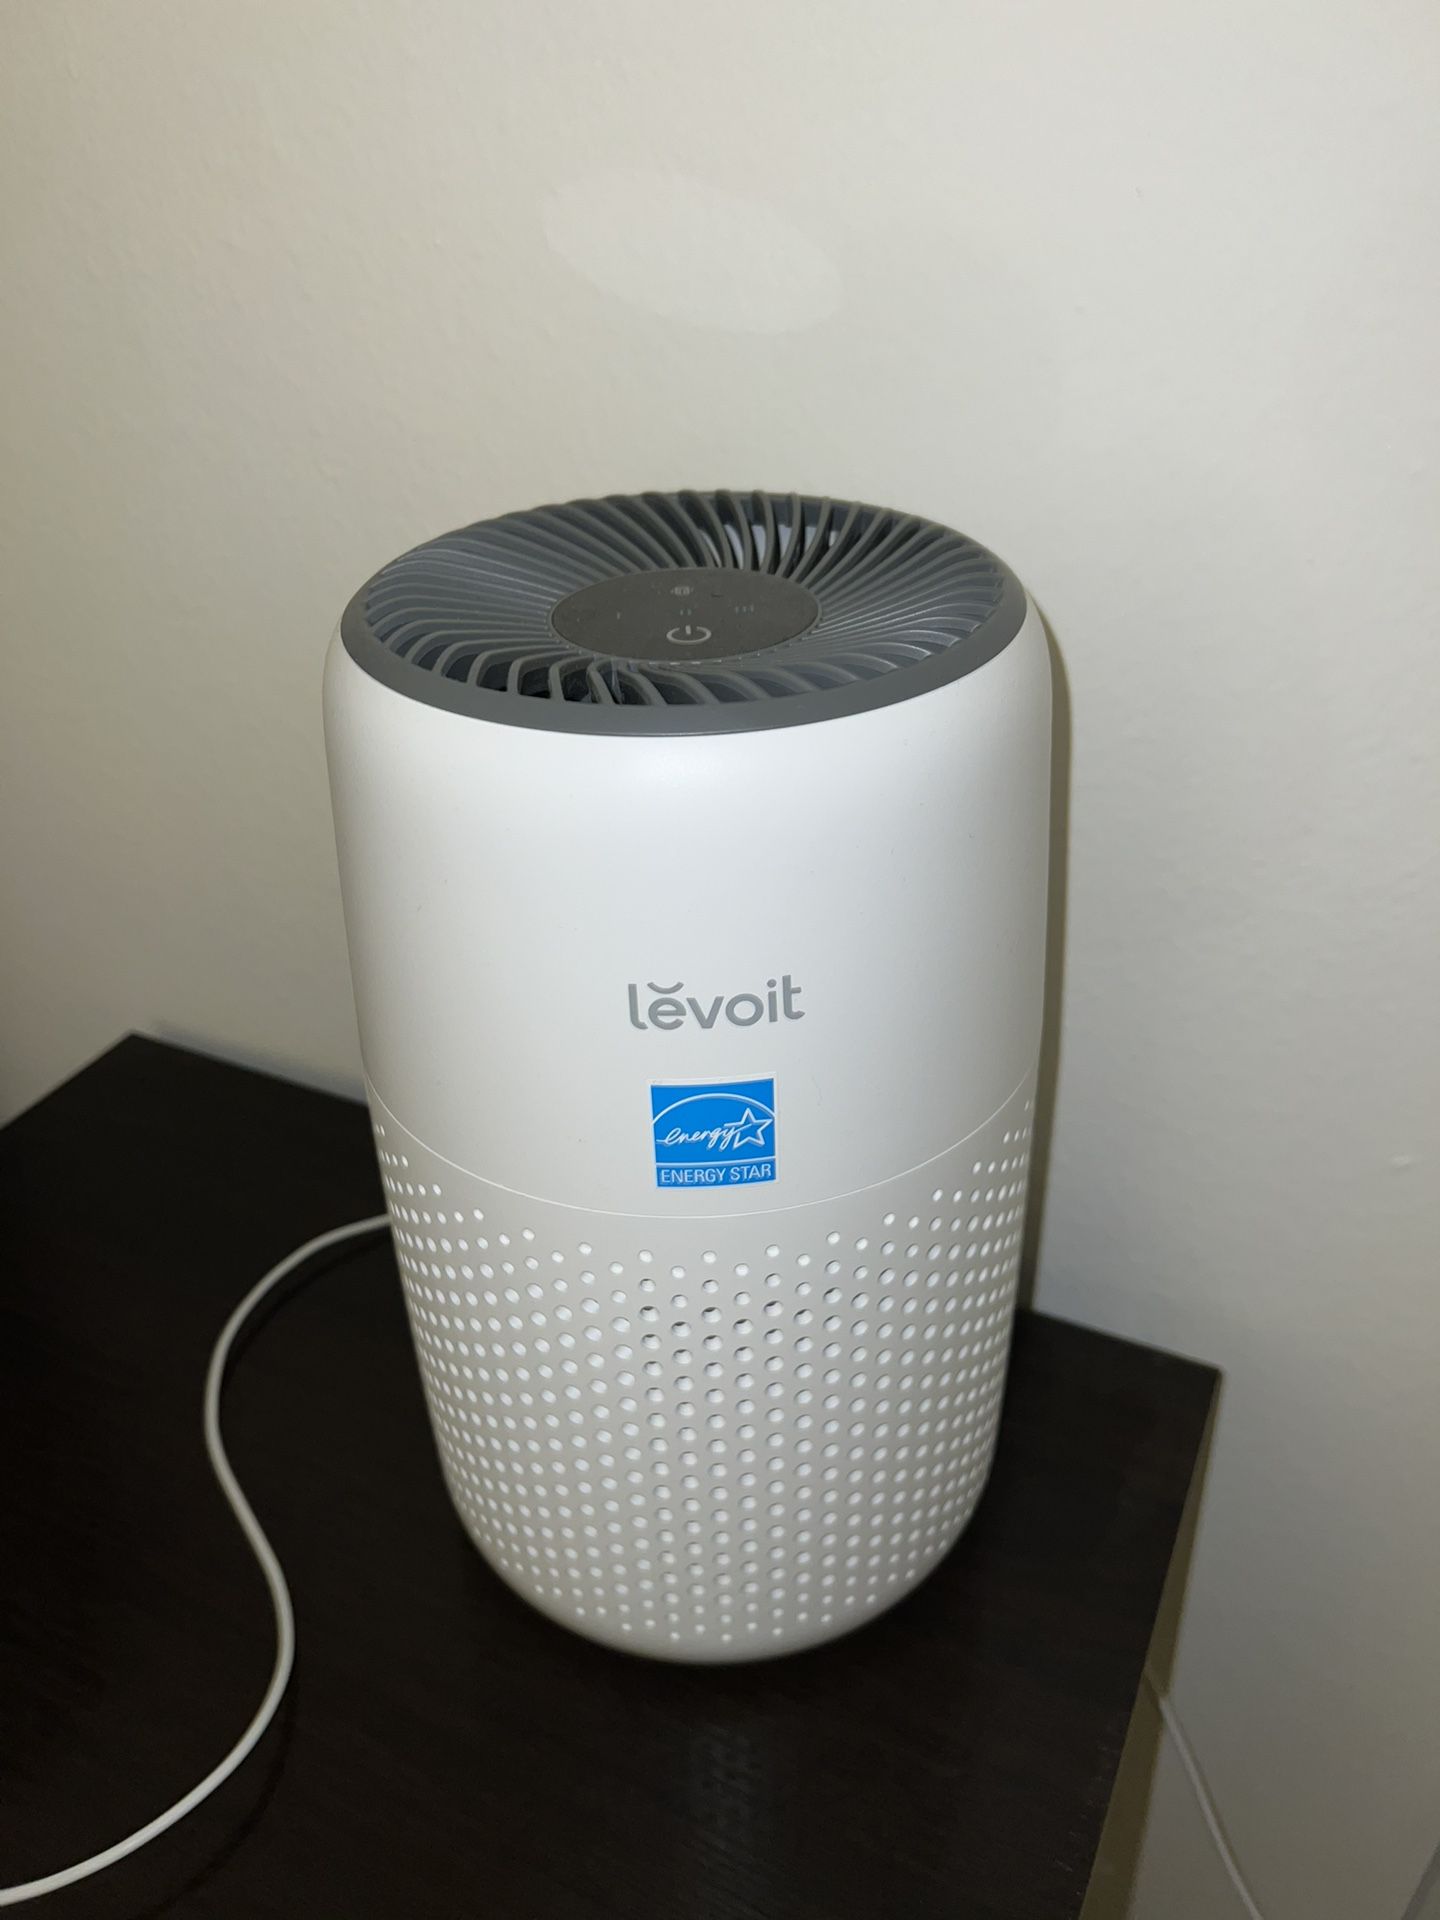 Levoit, Air Purifier With Box, Papers And Cables